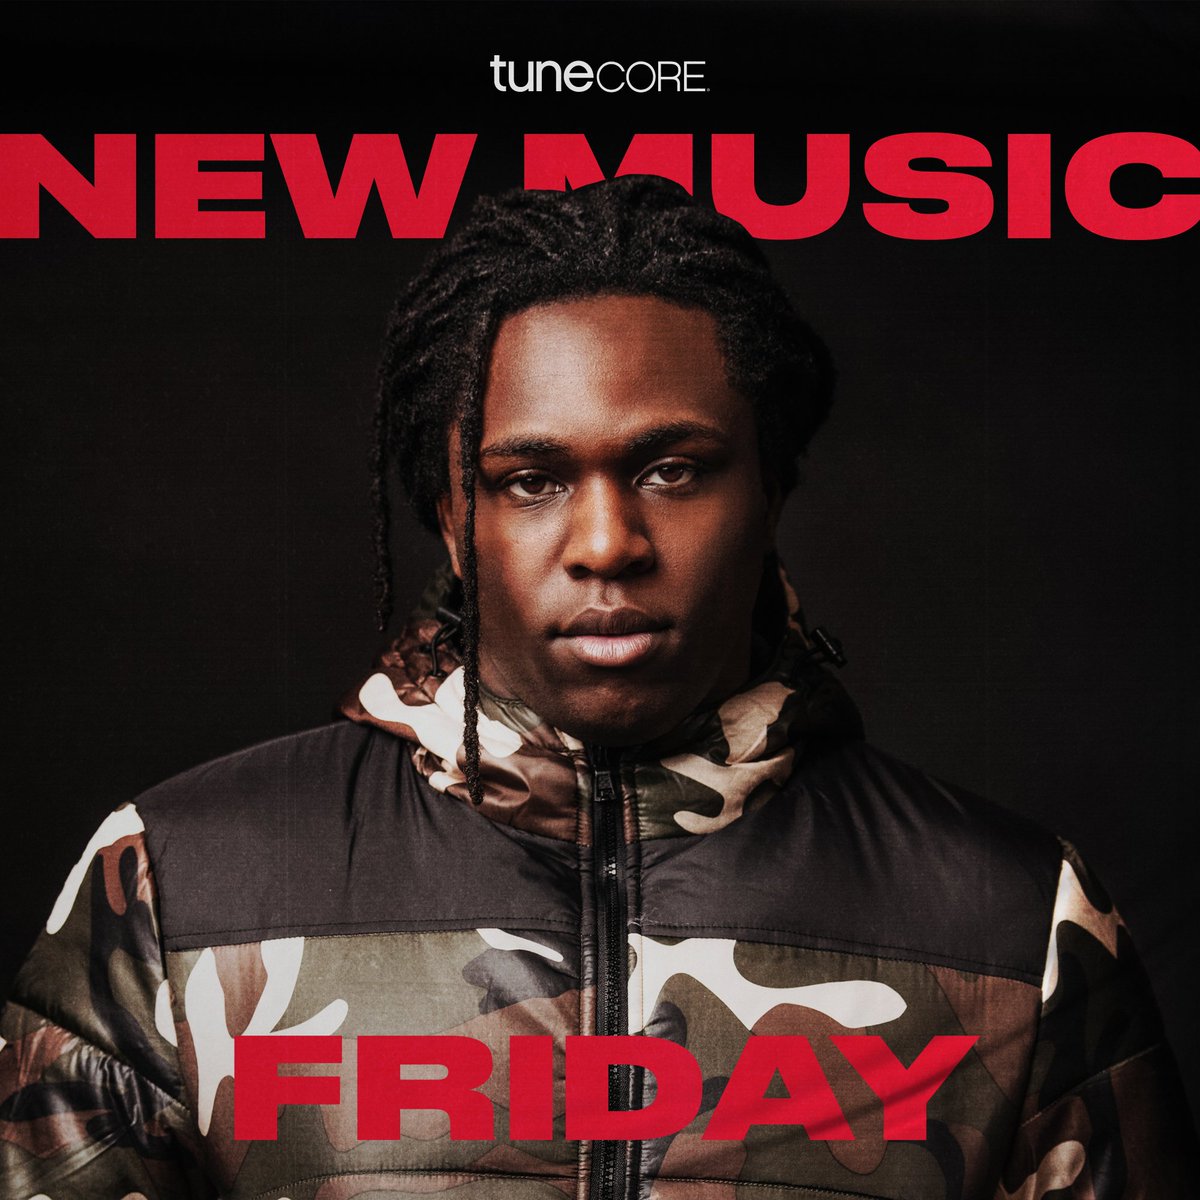 Just Dropped 🔥 #NewMusicFriday ft. @bugusdiemon's new release “Believe” ft. @russdiemon. Plus, more new music from @SnowThaProduct, @BentleyRobles, @ZeeMachineMusic, @AverySunshine + more. ⁠ Listen: bit.ly/3qUuY2J